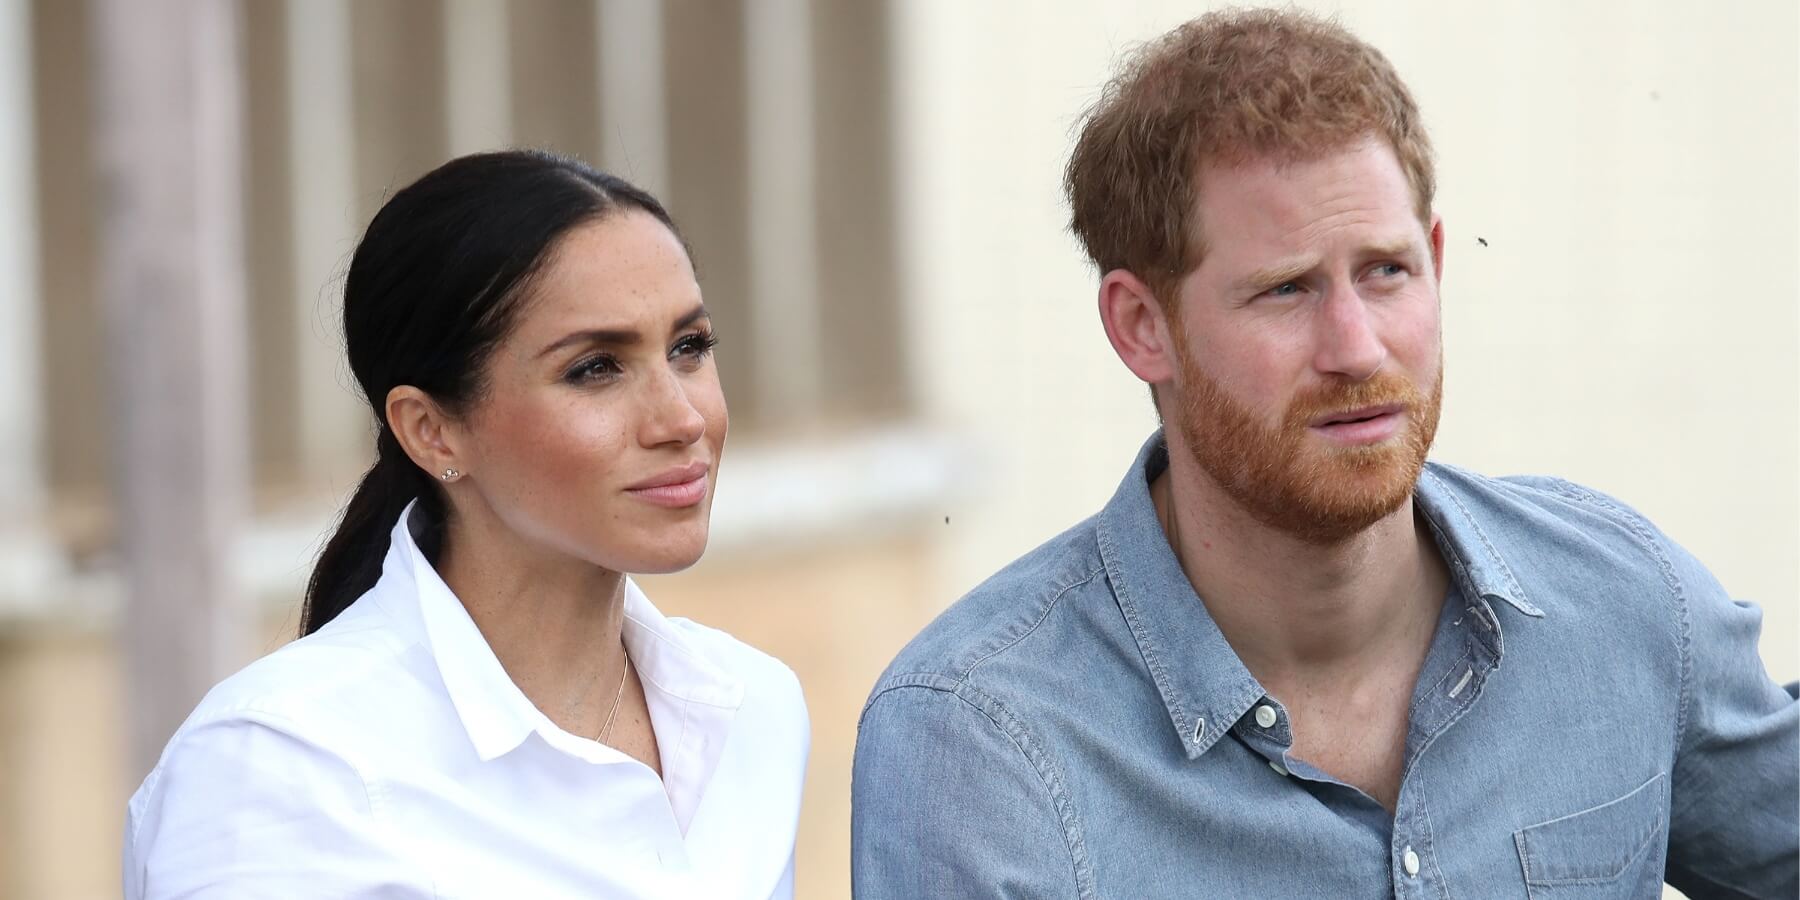 Meghan Markle and Prince Harry photographed in New Zealand in 2018.